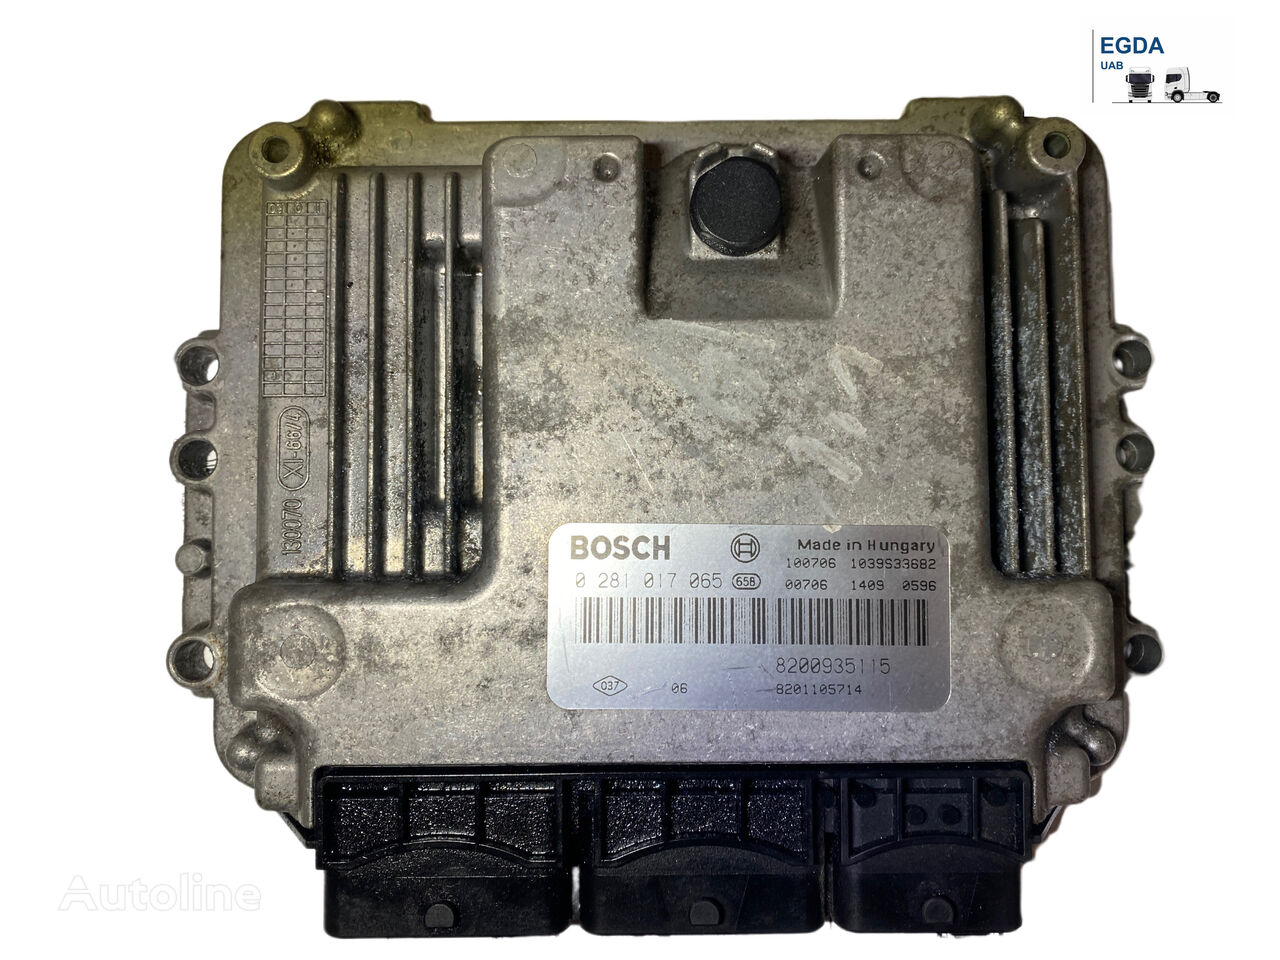 Renault BOSH control unit for Renault BOSCH truck tractor